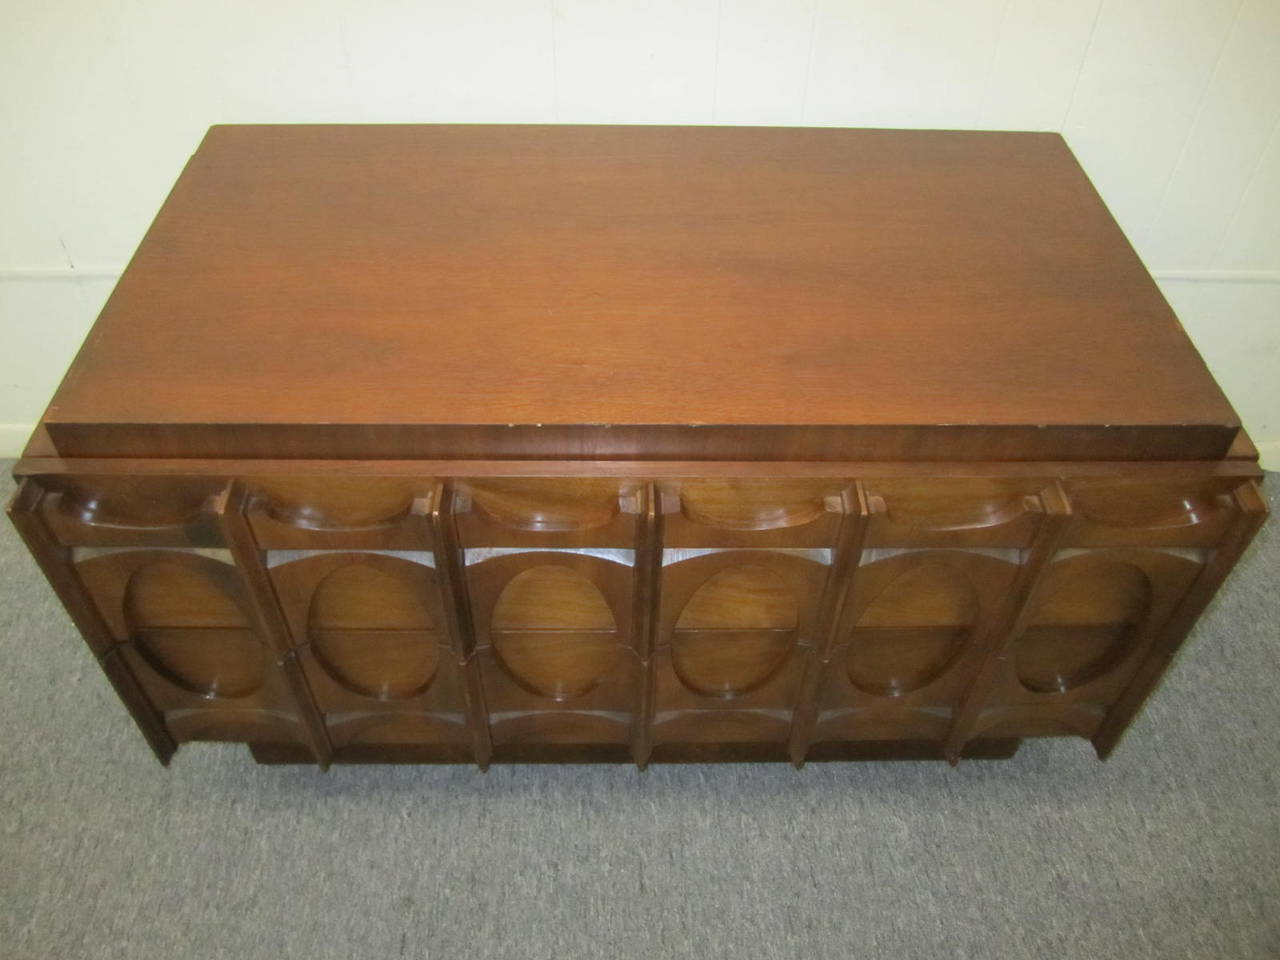 Fantastic Paul Evans inspired Brutalist walnut bachelors chest. Wonderfully carved walnut drawers create a chunky Brutalist look. If unusual style is what you after this is the piece for you. This is a very rare small size for this Brutalist line of